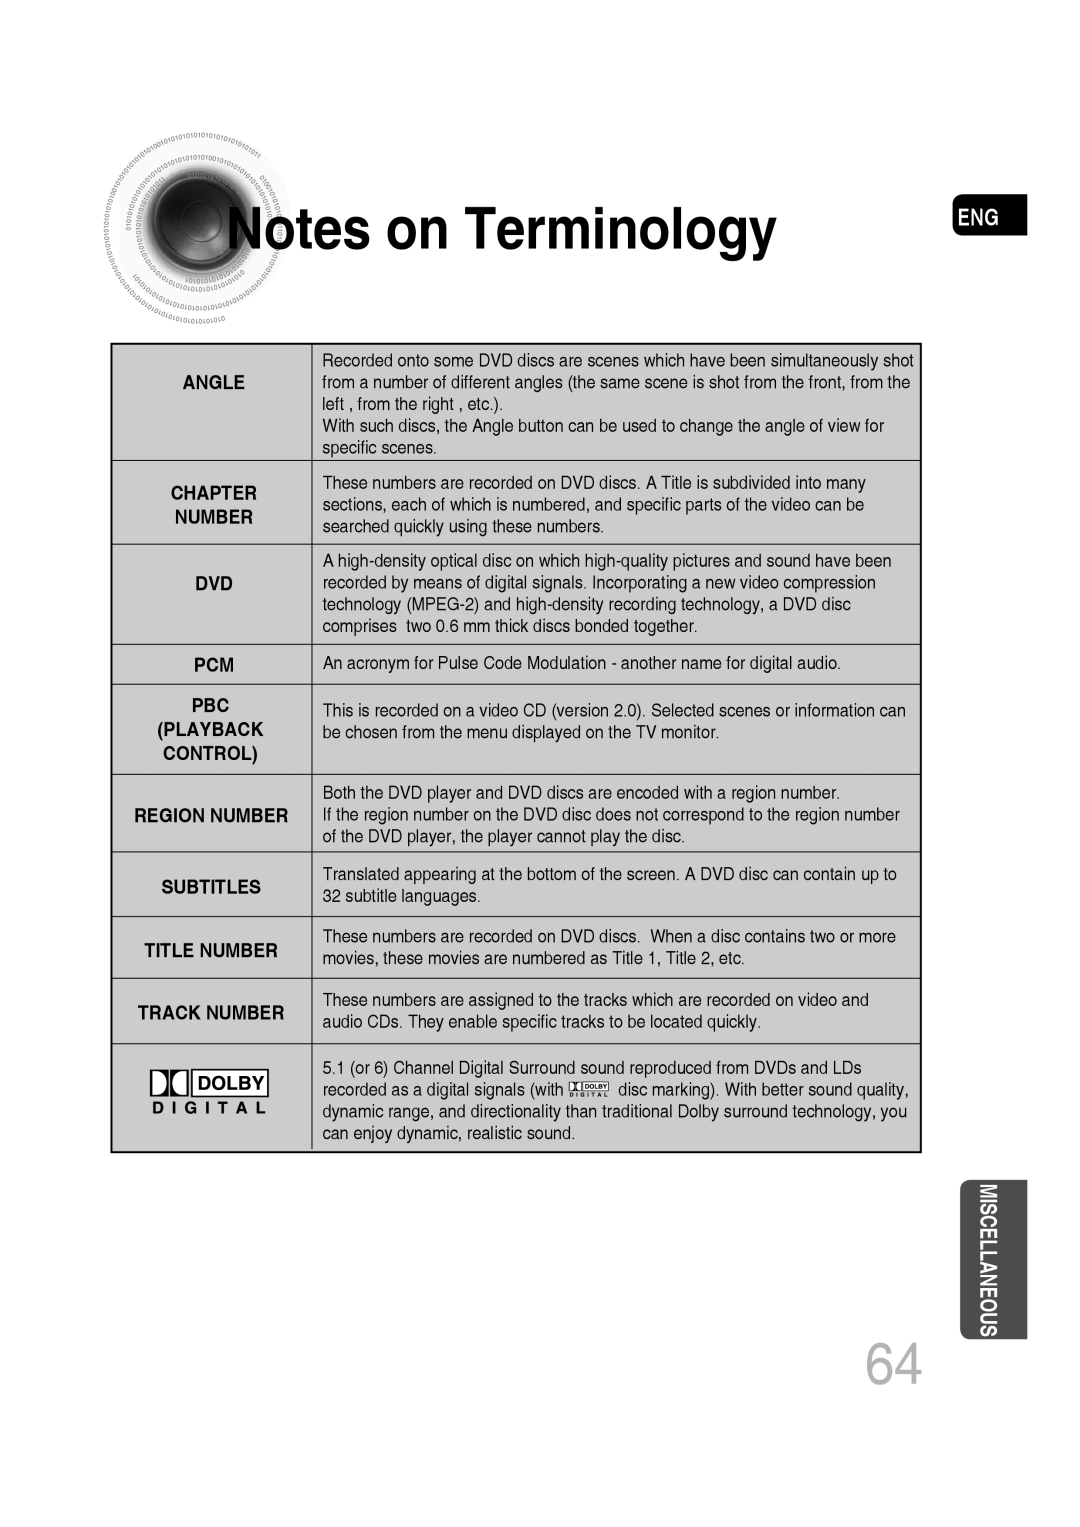 Samsung MM-C430D manual Notes on Terminology, Angle, Chapter, Playback, Control, Region Number, Subtitles, Title Number 